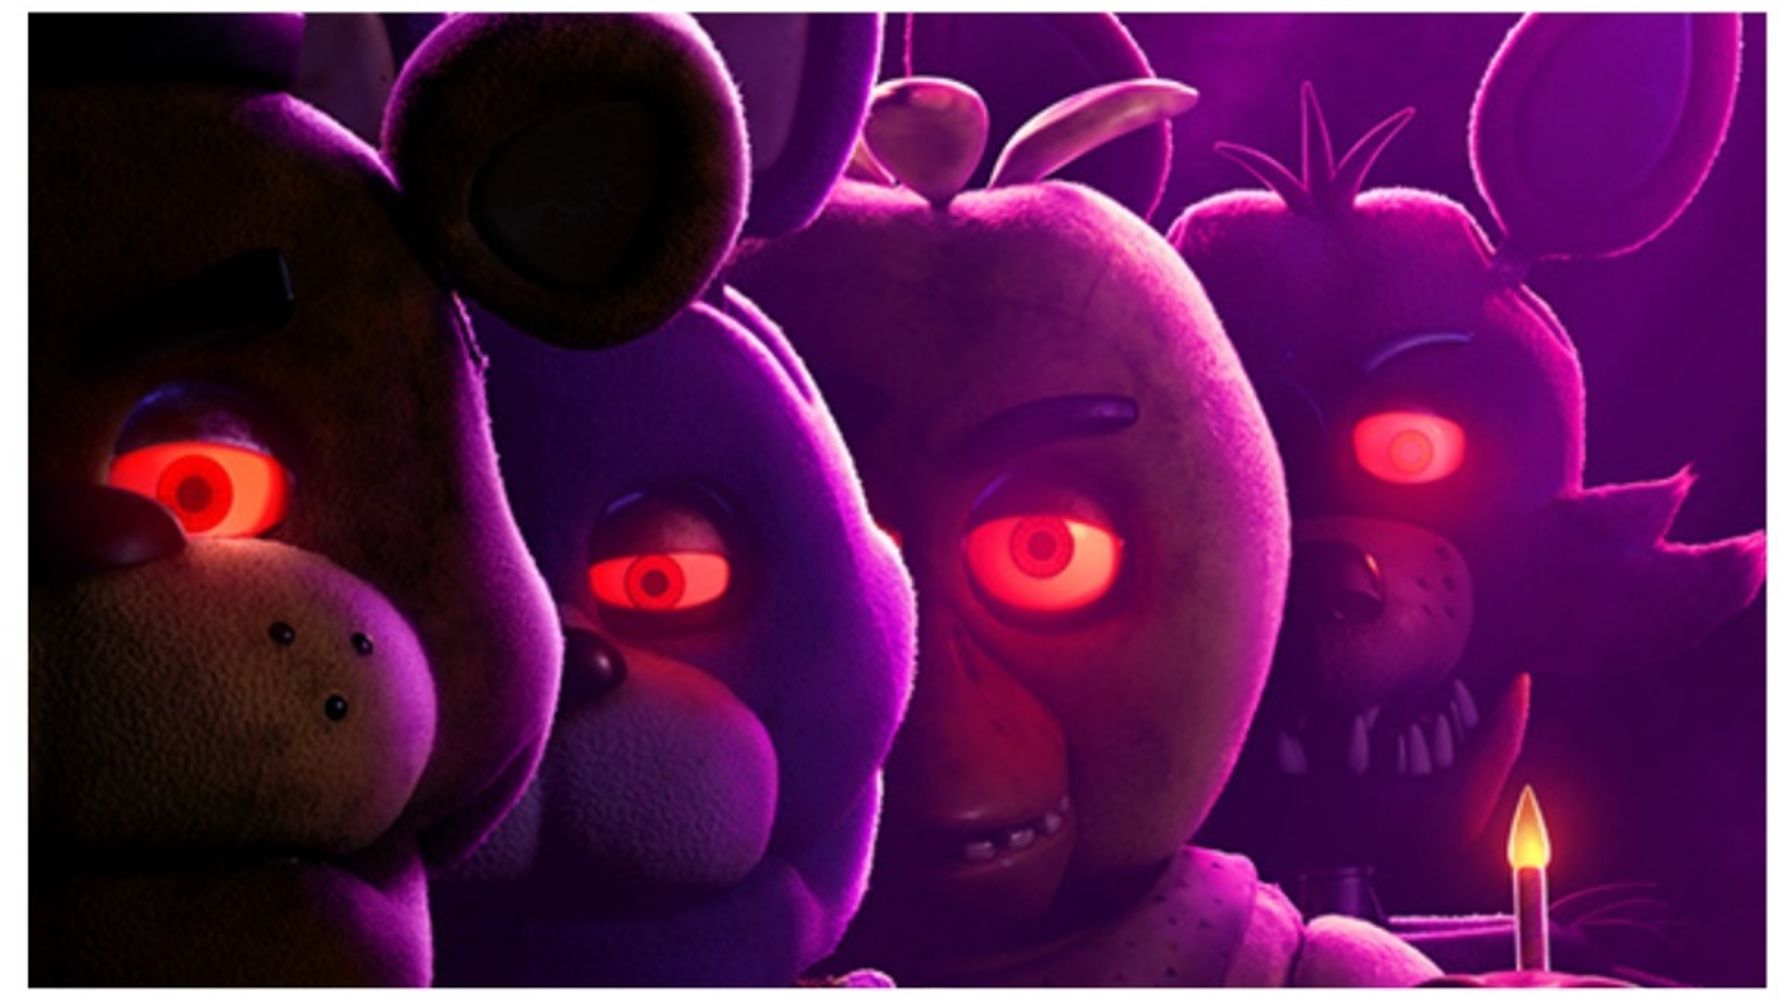 Five Nights At Freddy's' Gets Killer First-Look Trailer